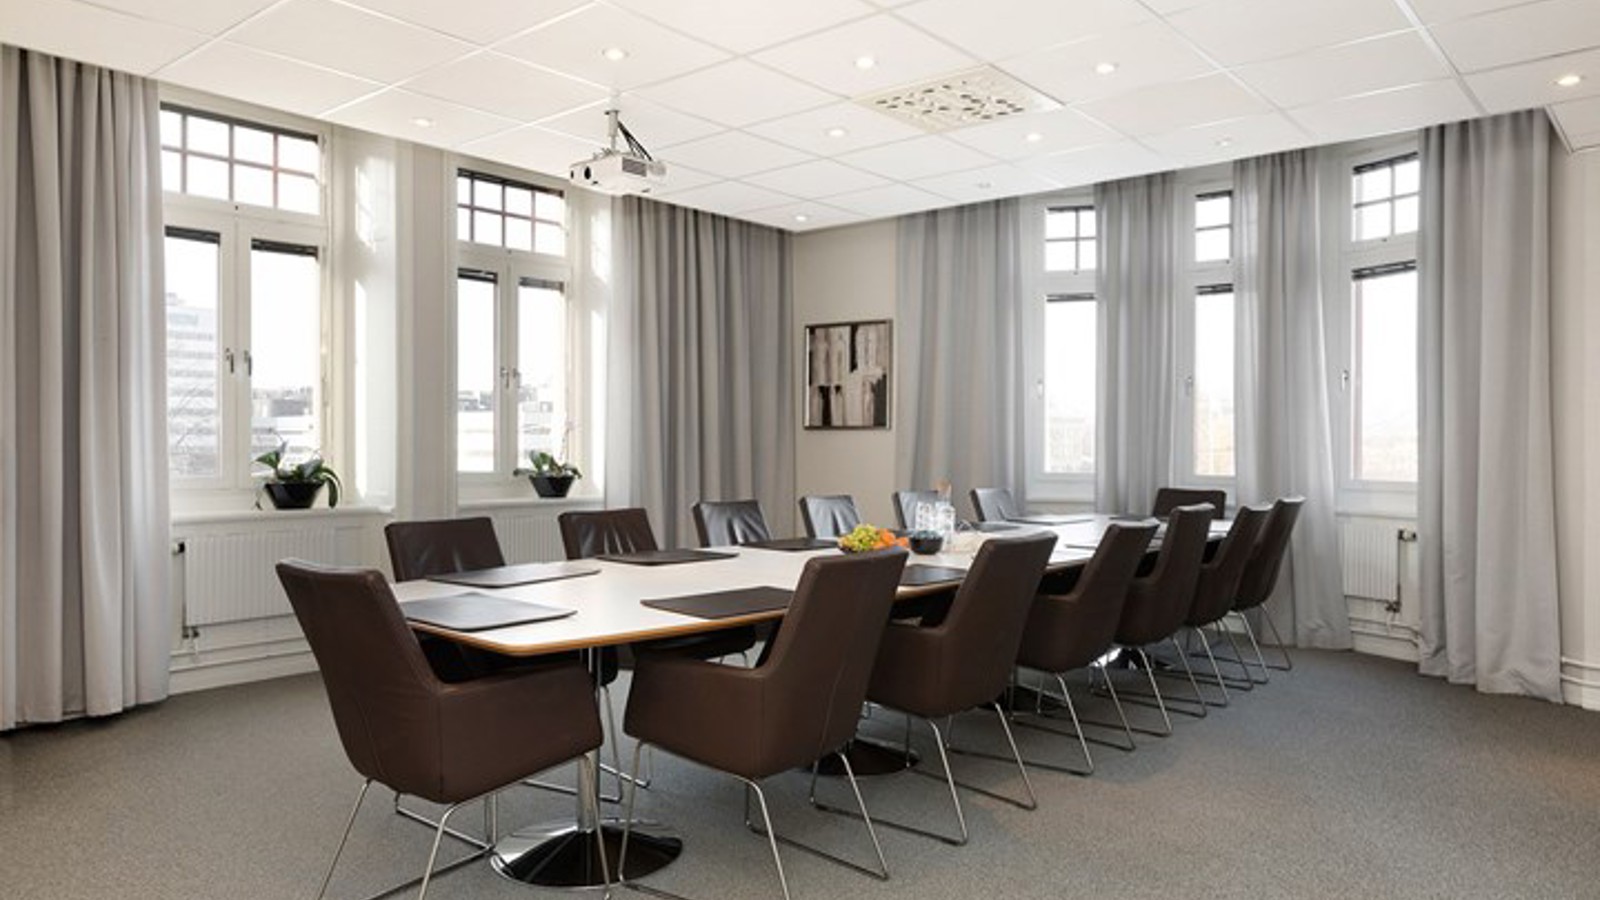 Conference room with board seating, large windows and gray curtains